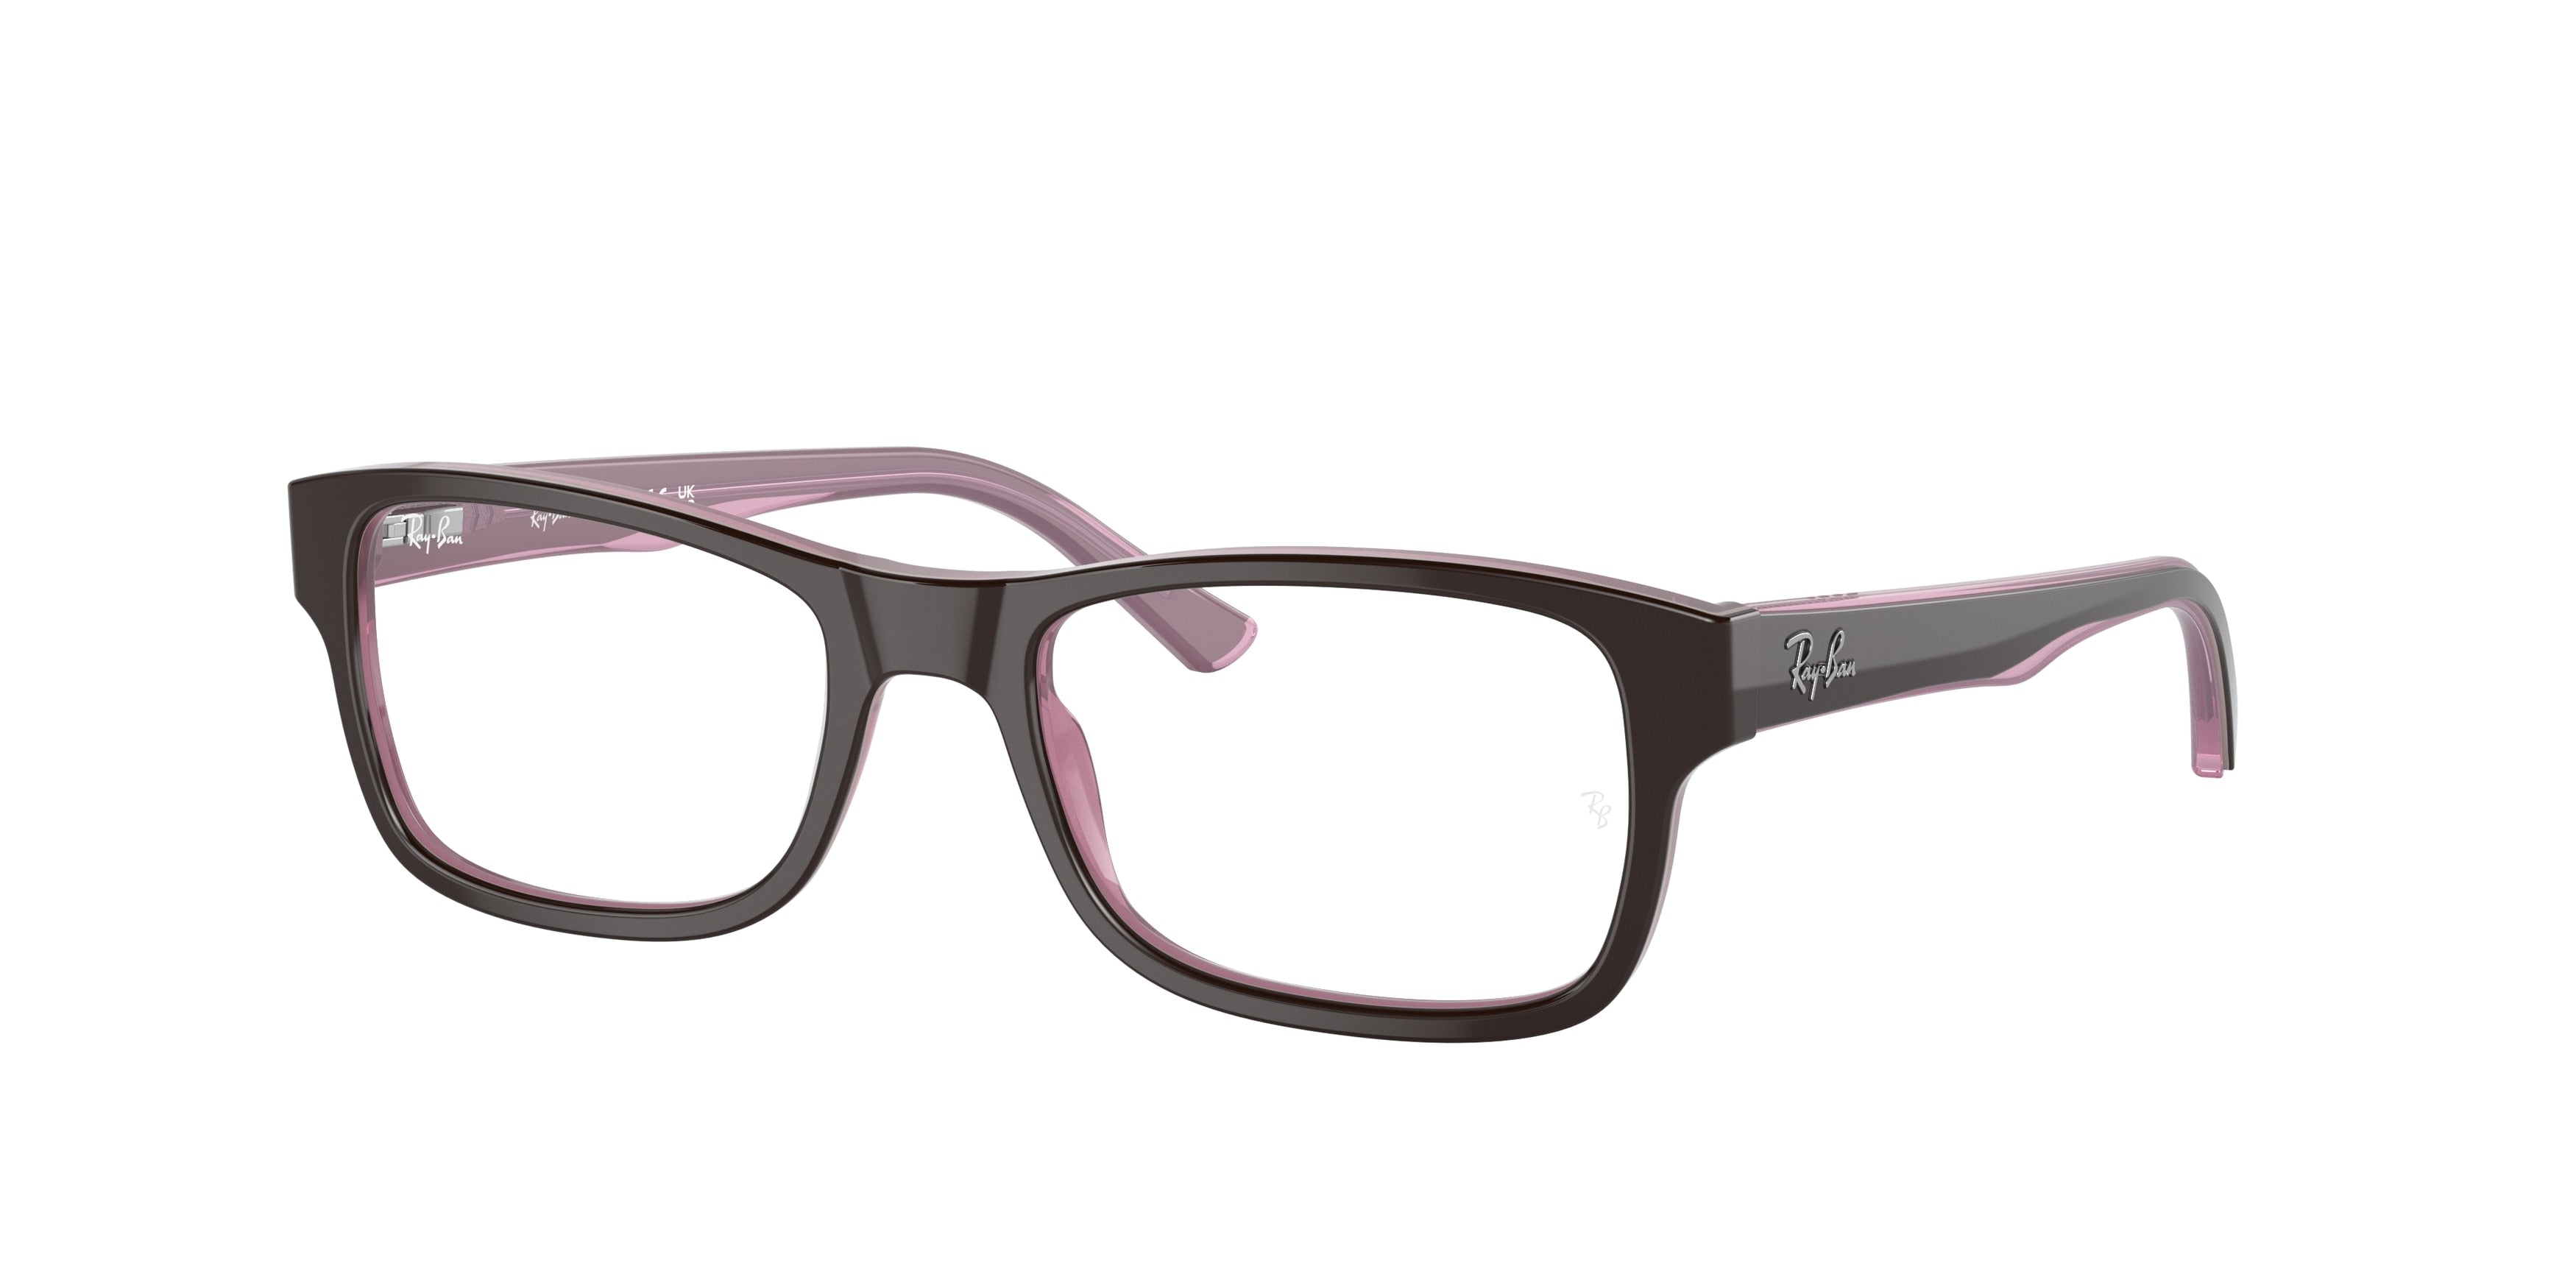 Ray-Ban Optical RX5268 Square Eyeglasses  2126-Brown On Pink 52-135-17 - Color Map Brown